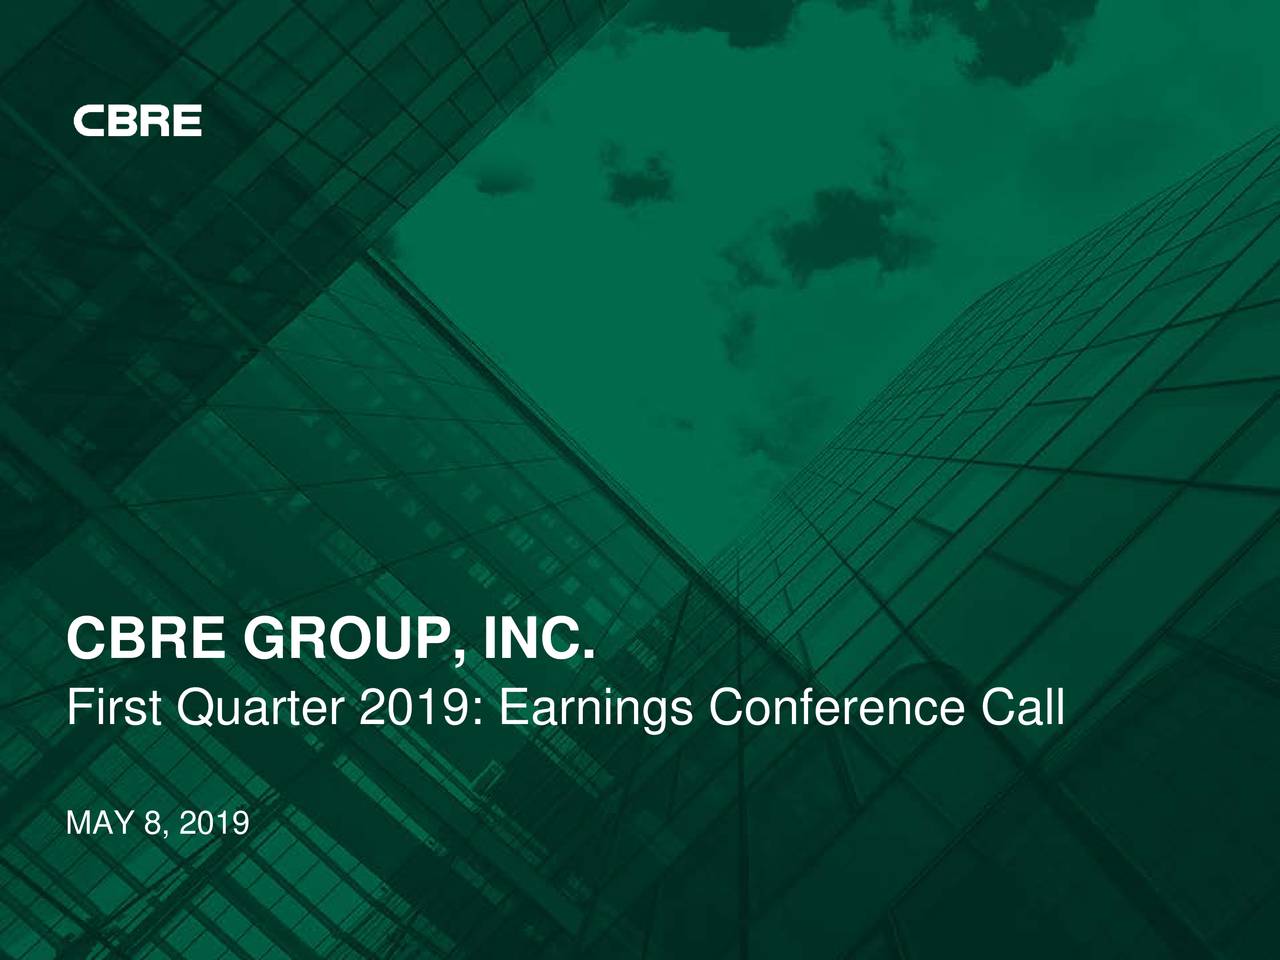 CBRE Group, Inc. 2019 Q1 Results Earnings Call Slides (NYSECBRE